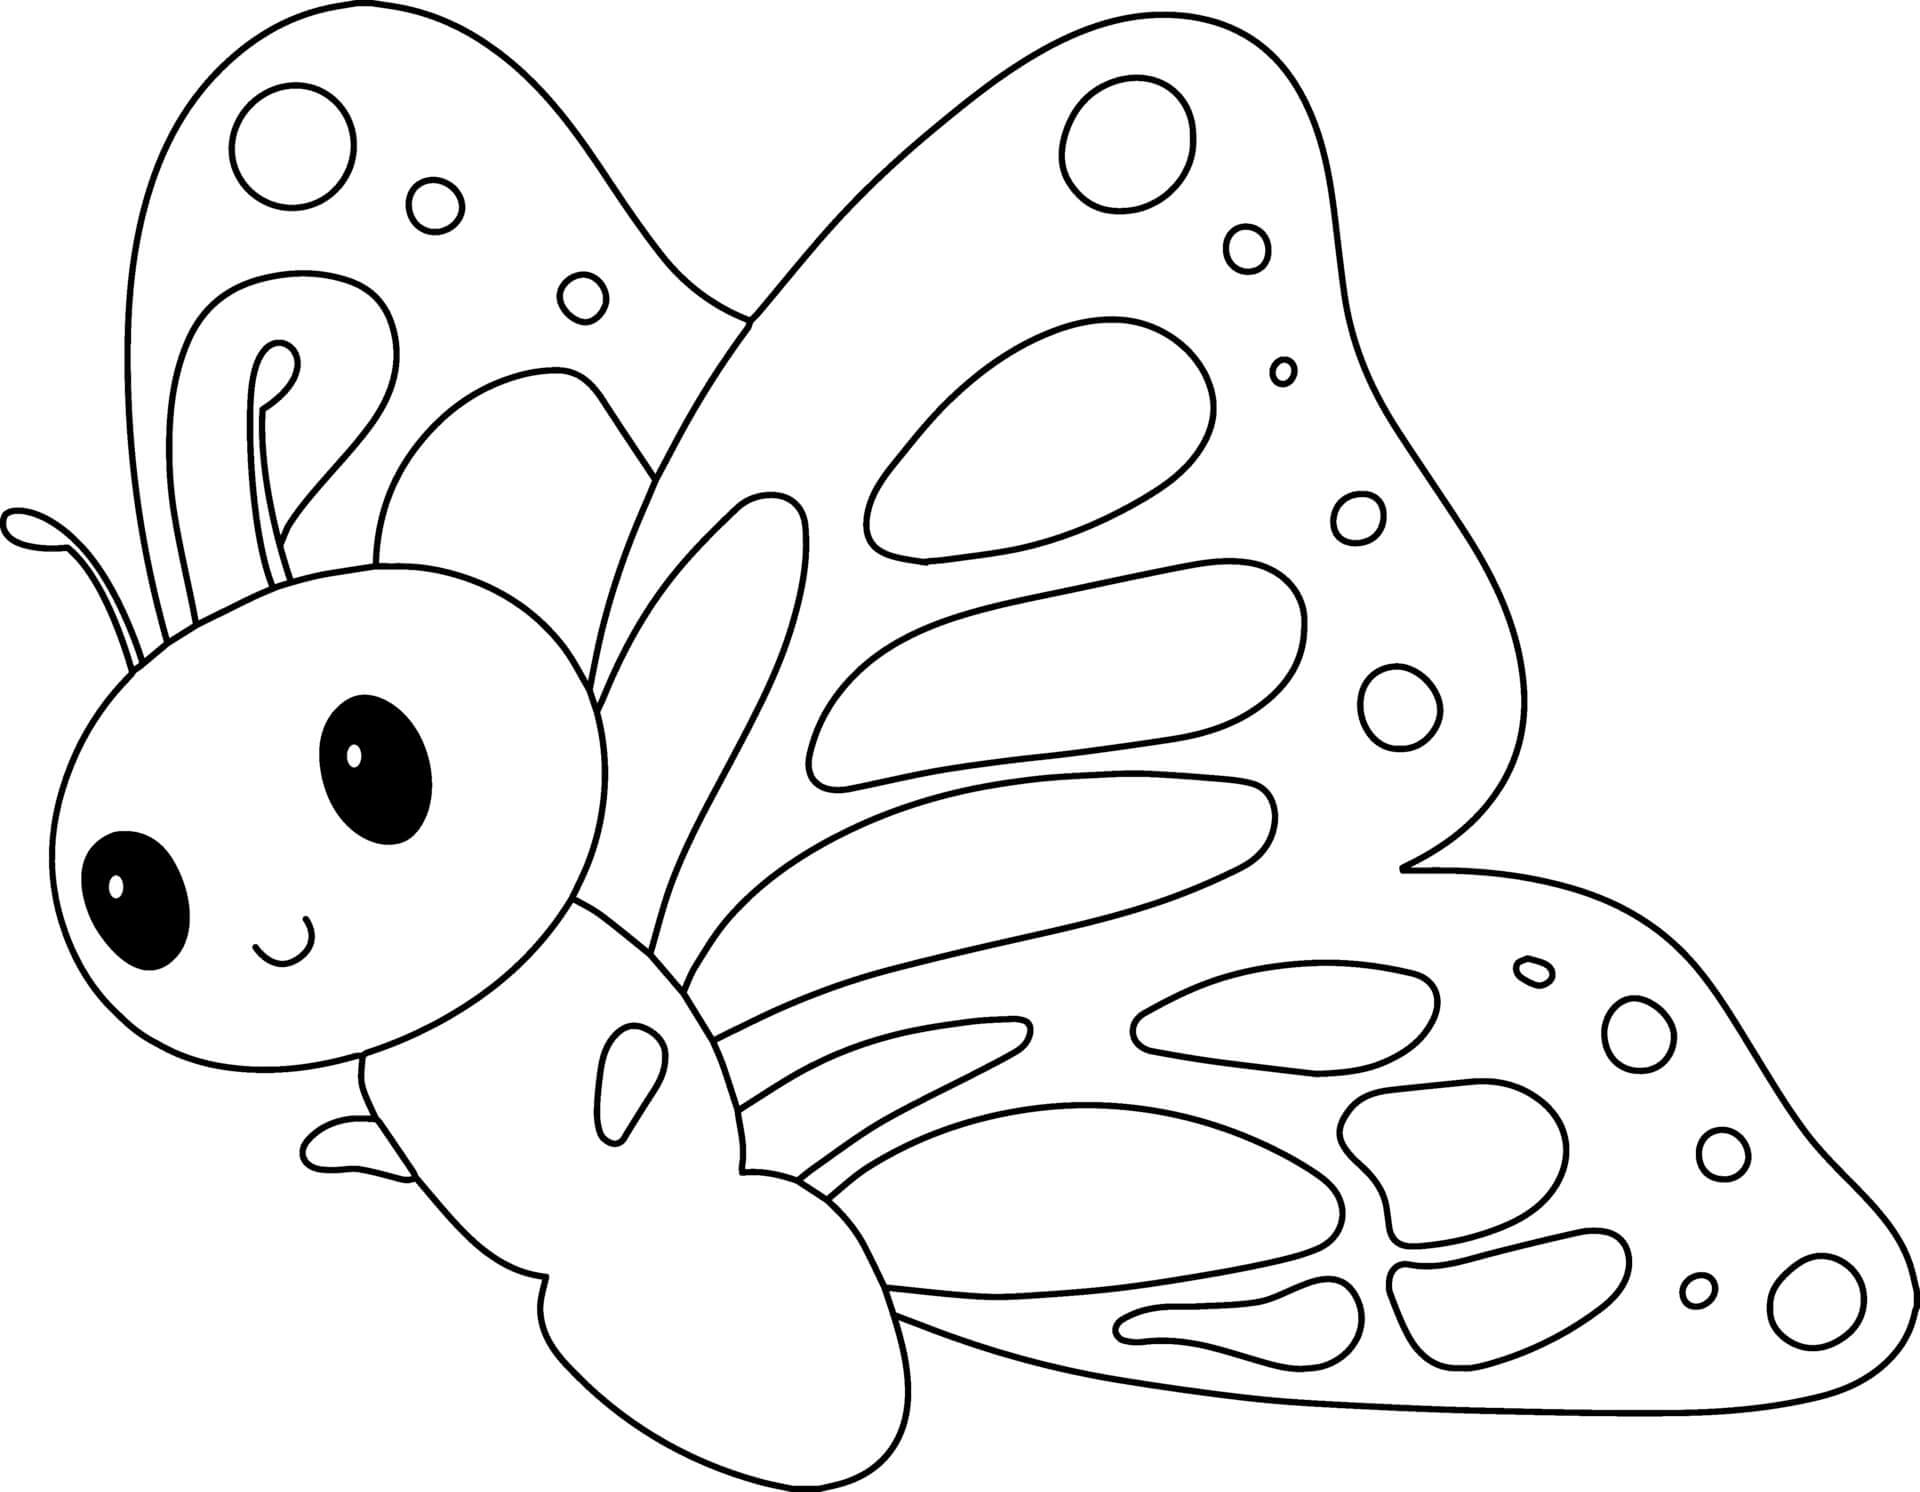 Butterfly Coloring Pages   Coloring Cool